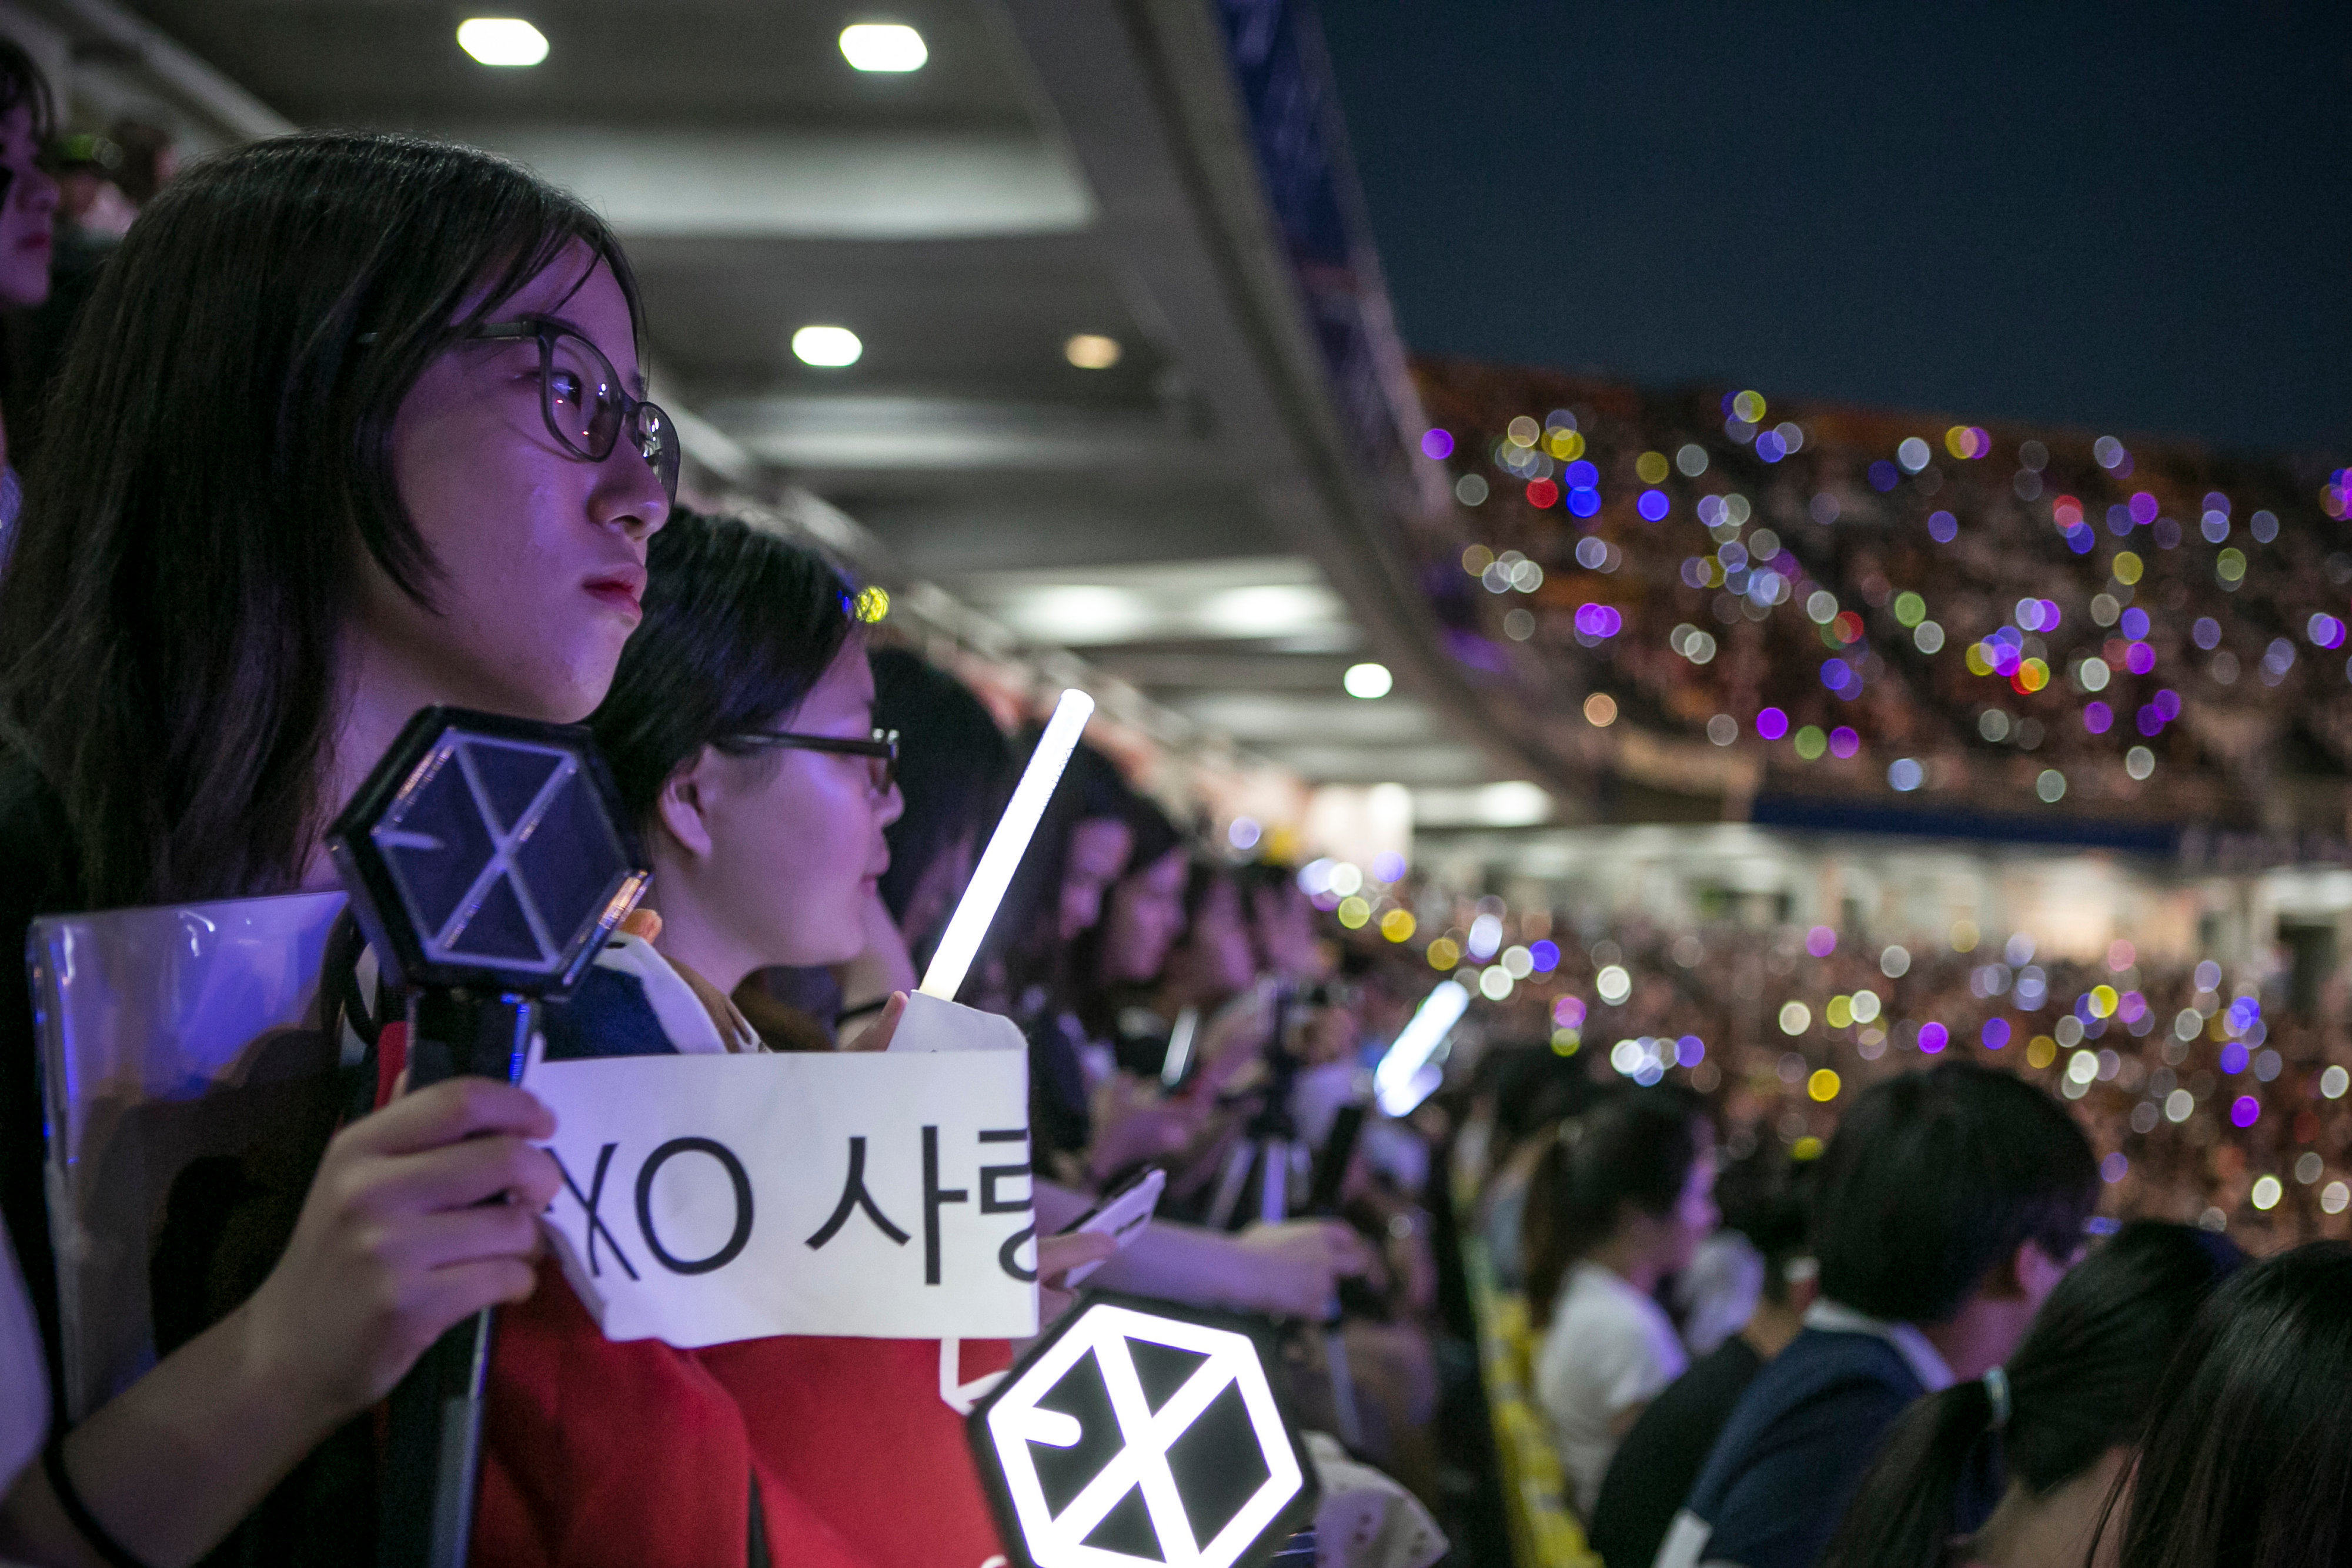 K-pop label SM Entertainment, home to Exo and NCT, has promised to tackle bad fans. Photo: Jean Chung/Getty Images